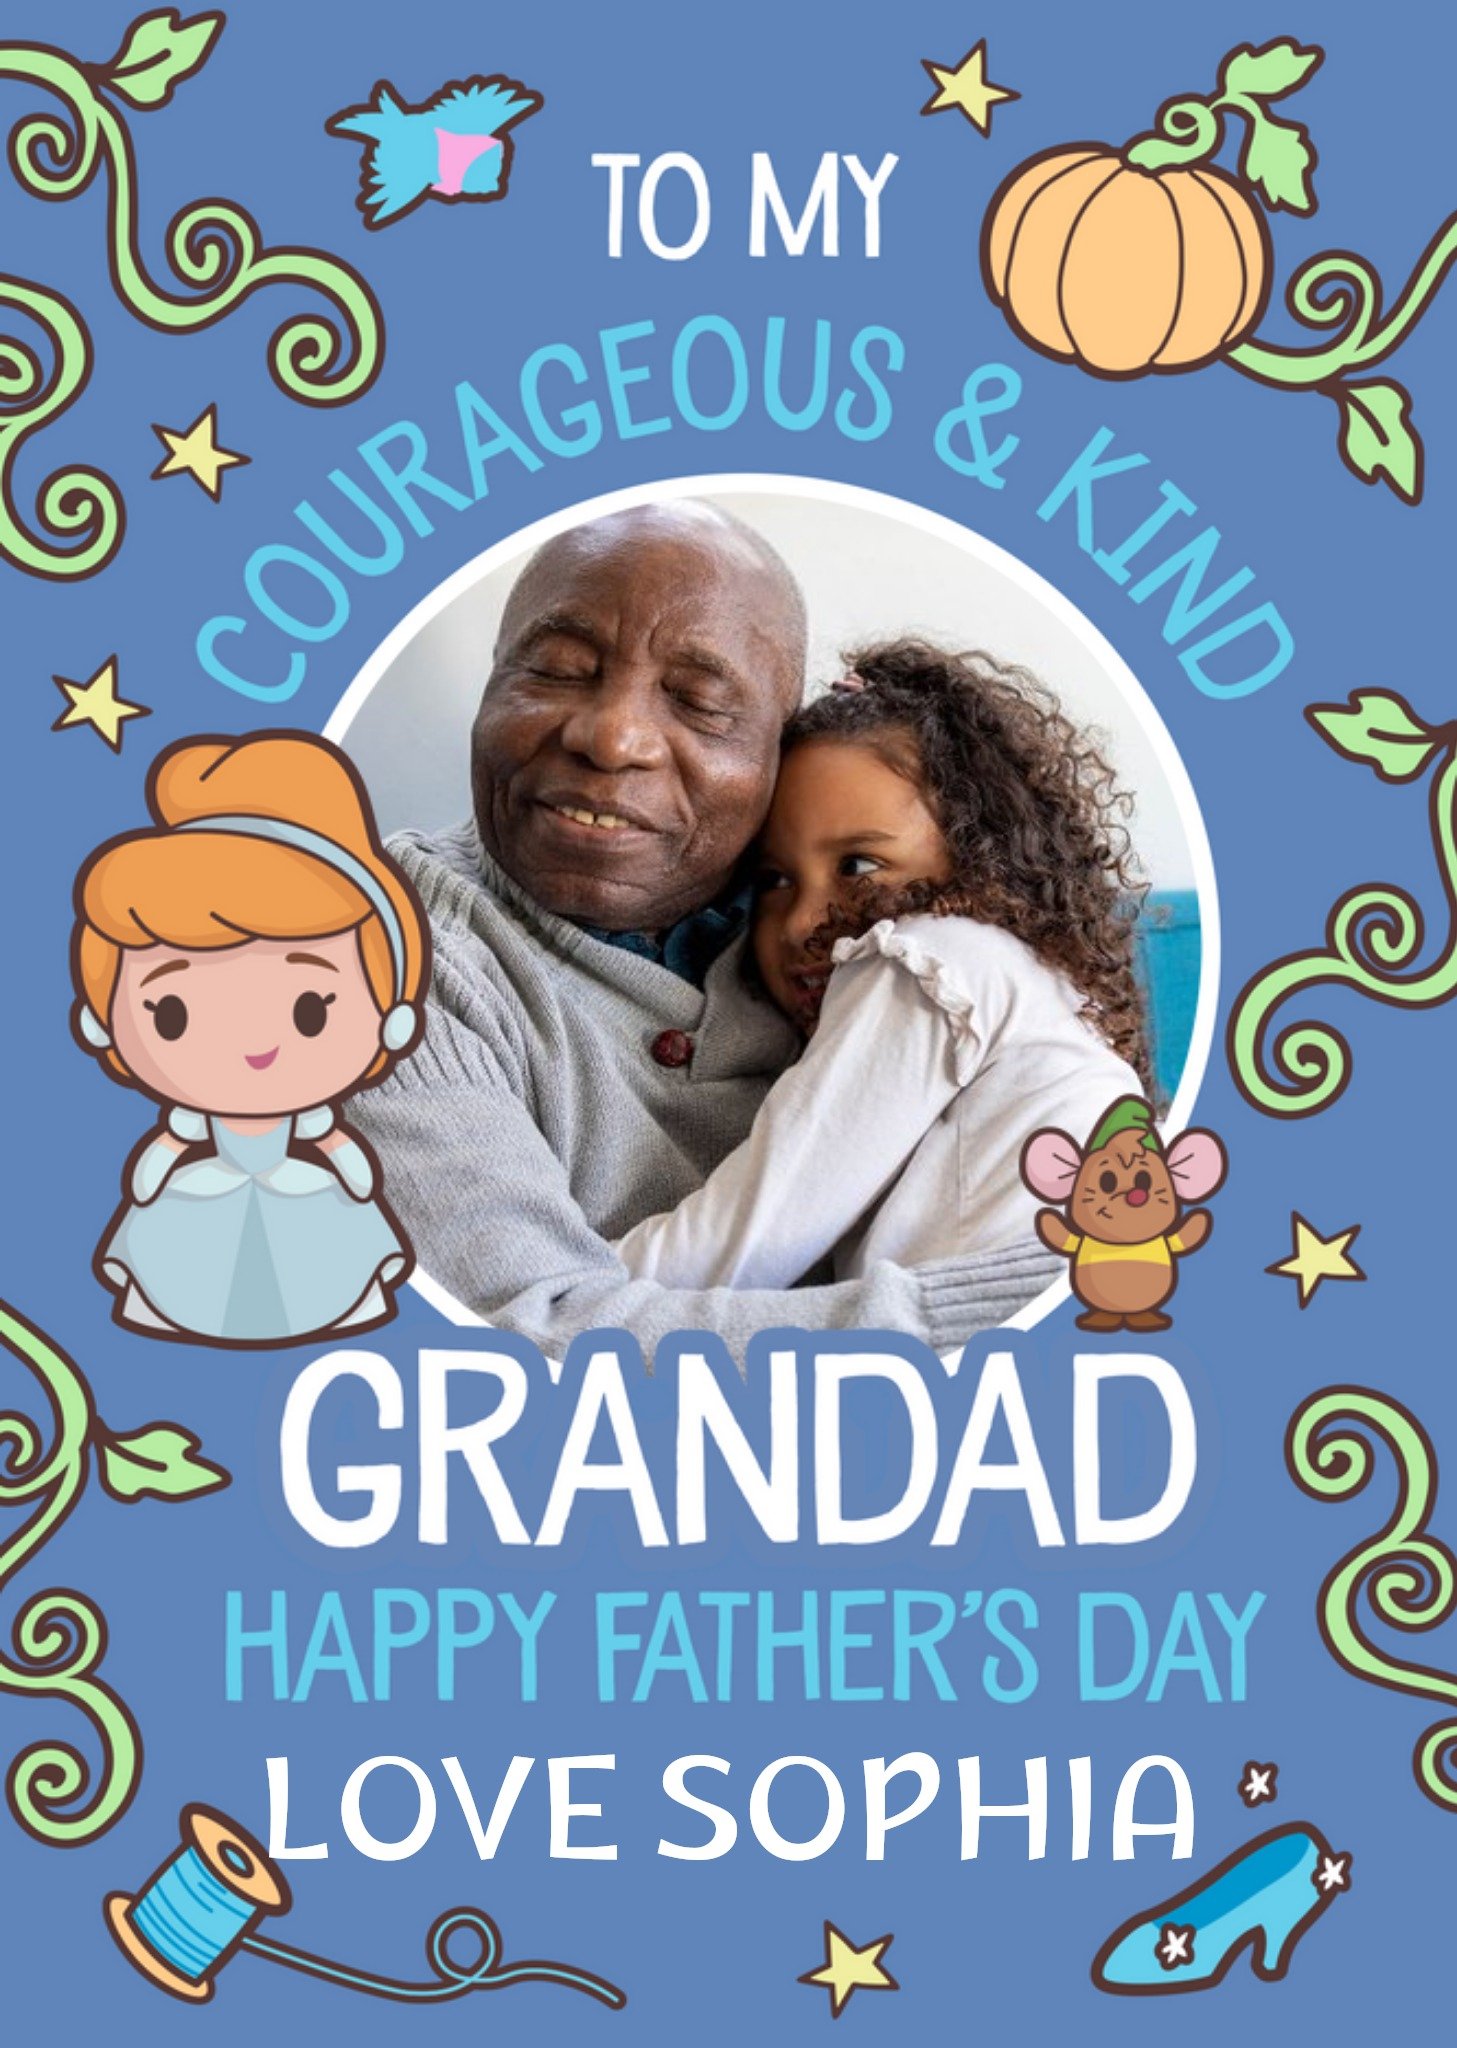 Disney Princess Courageous & Kind Grandad Photo Upload Father's Day Card, Large